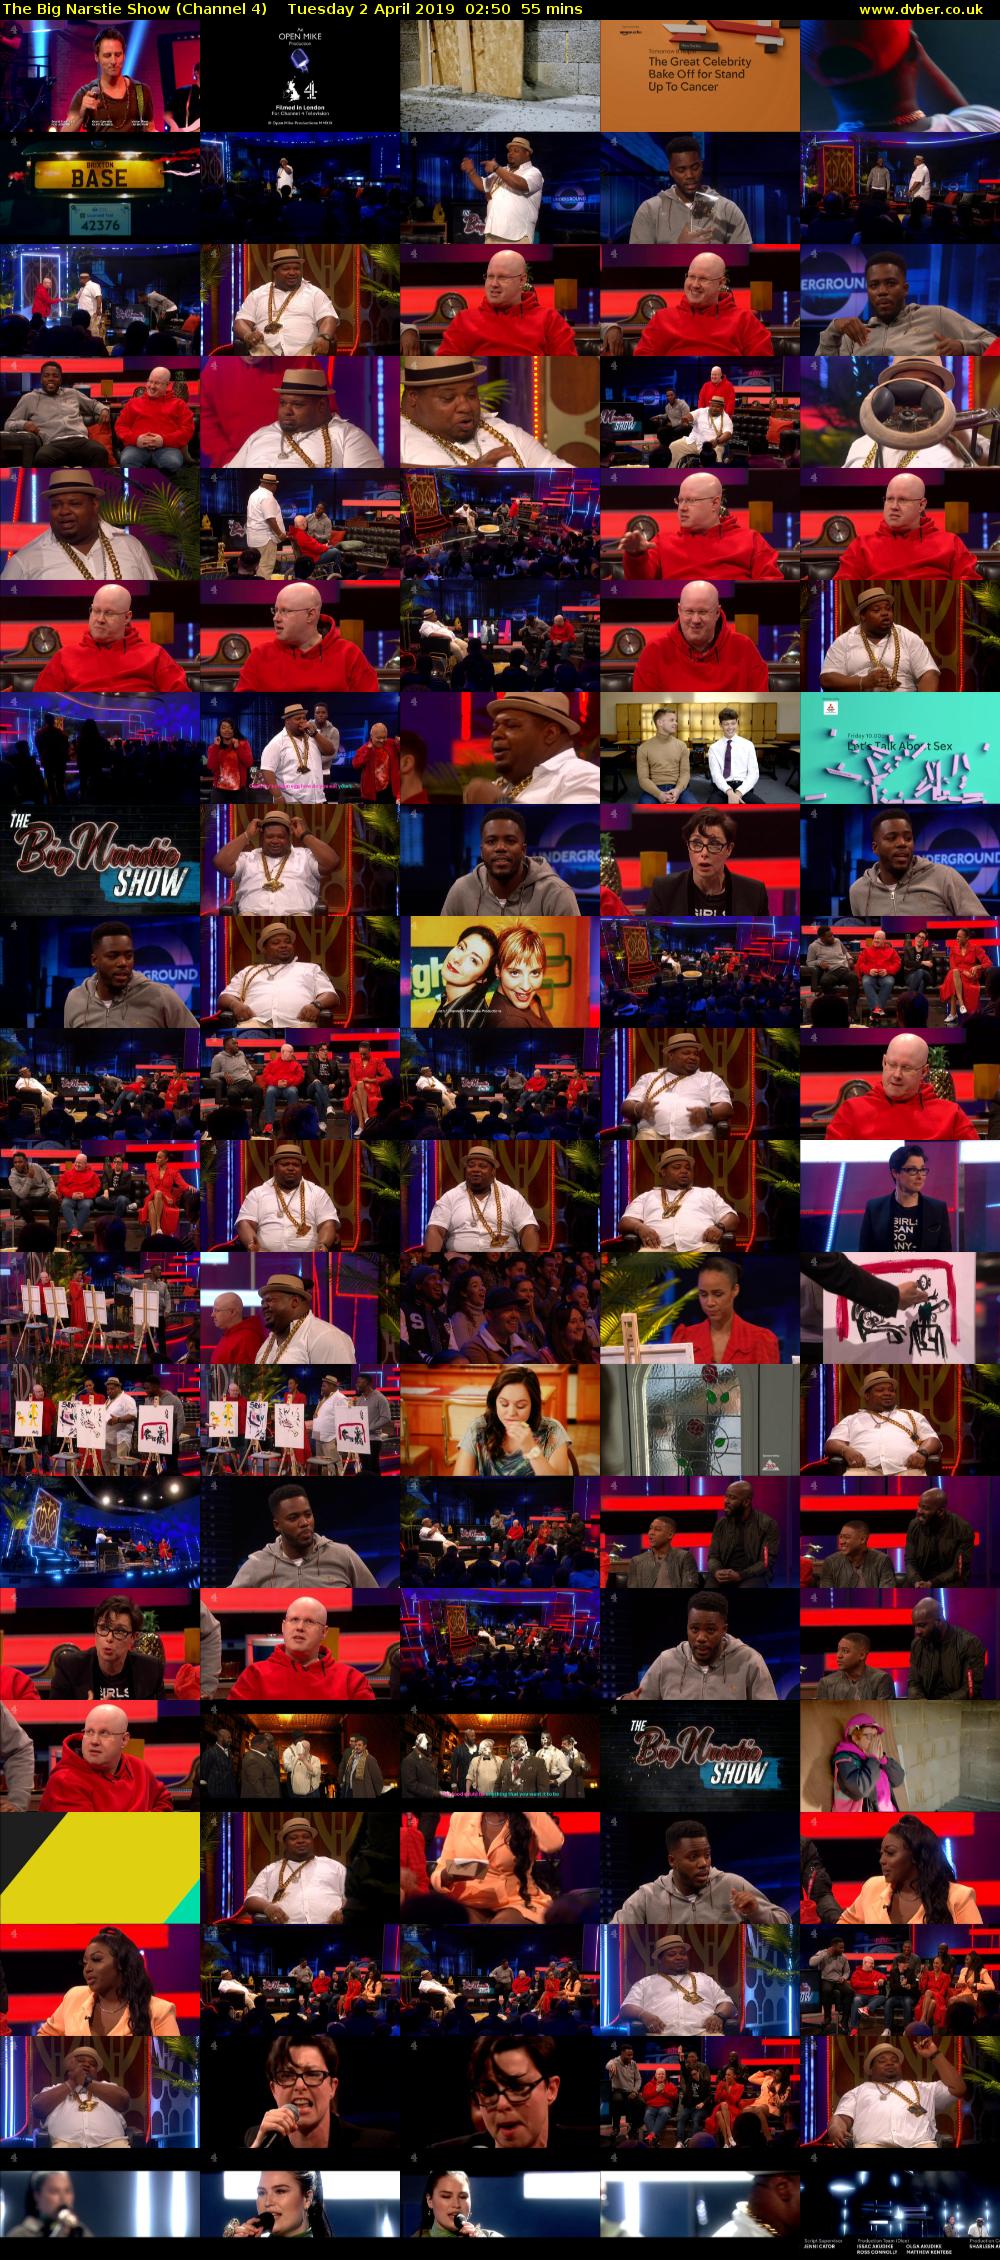 The Big Narstie Show (Channel 4) Tuesday 2 April 2019 02:50 - 03:45